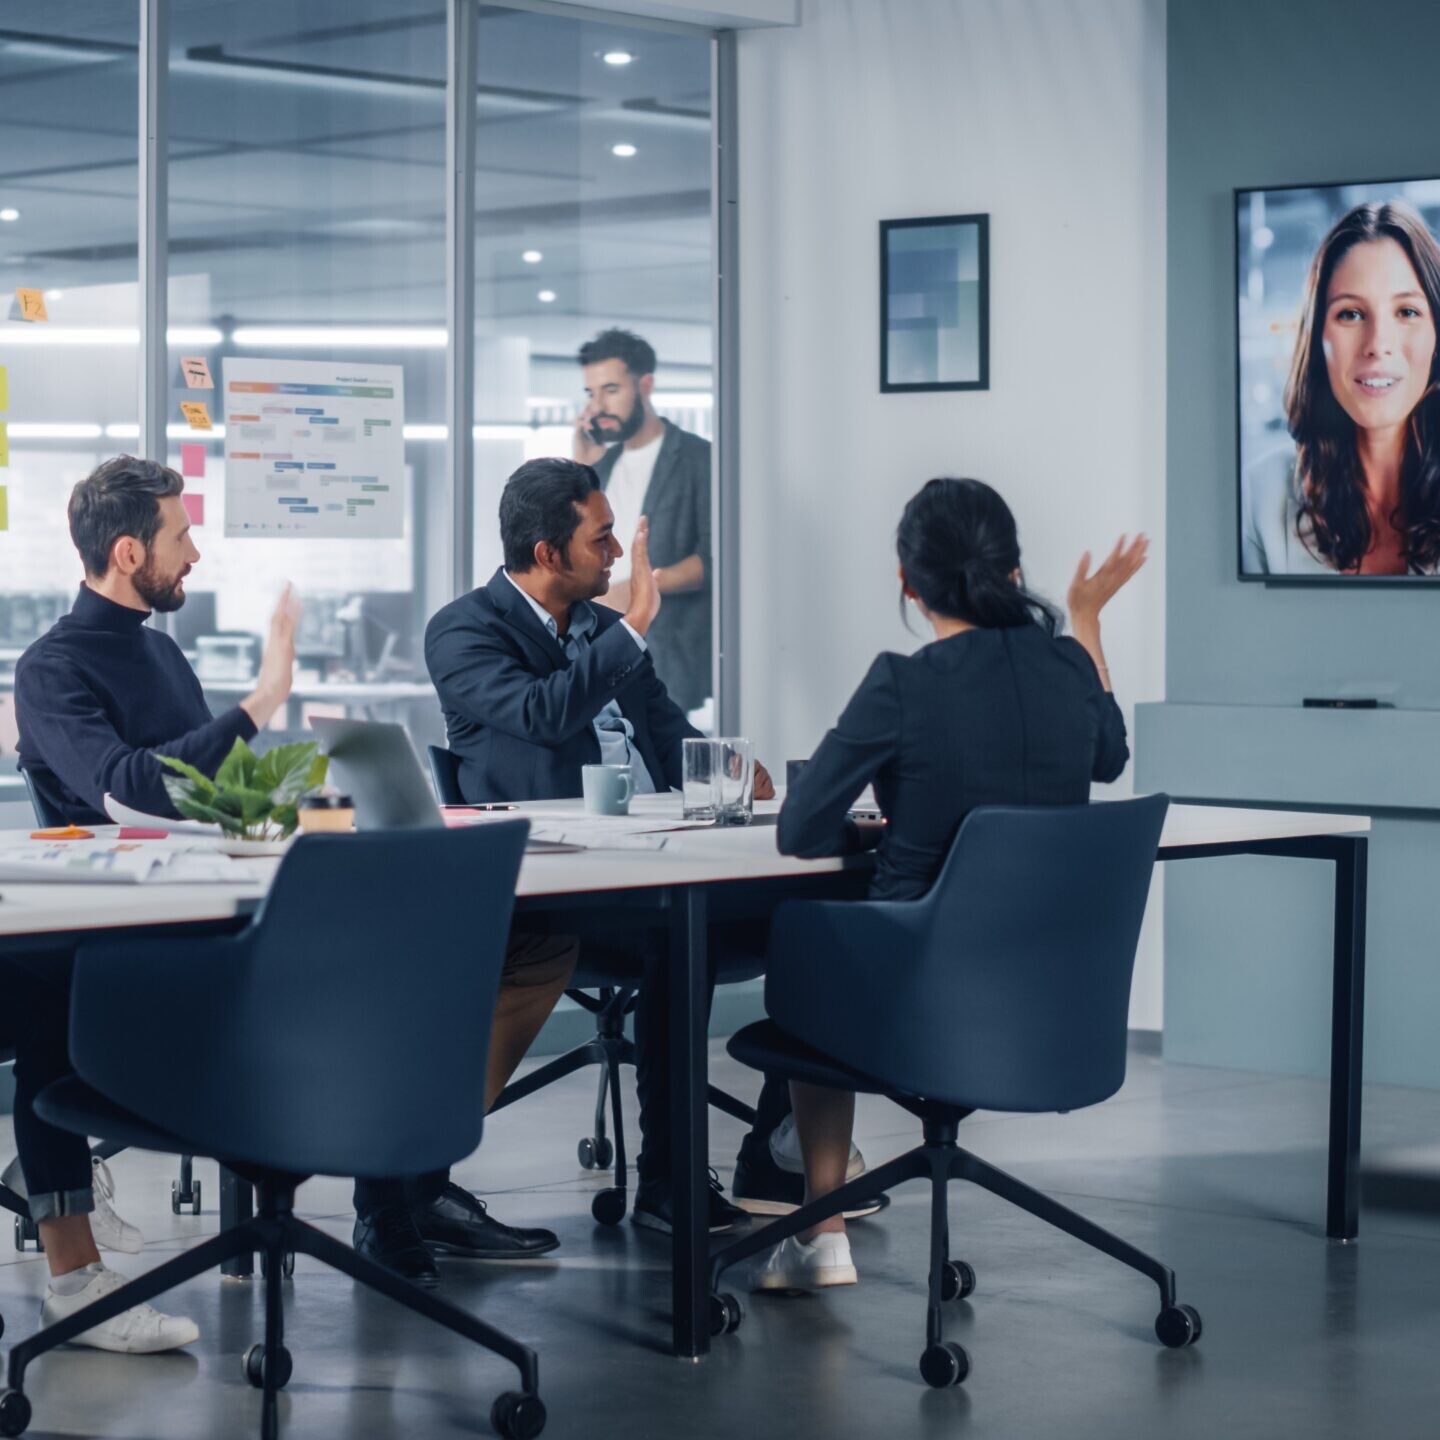 workers in a conference room on a video call